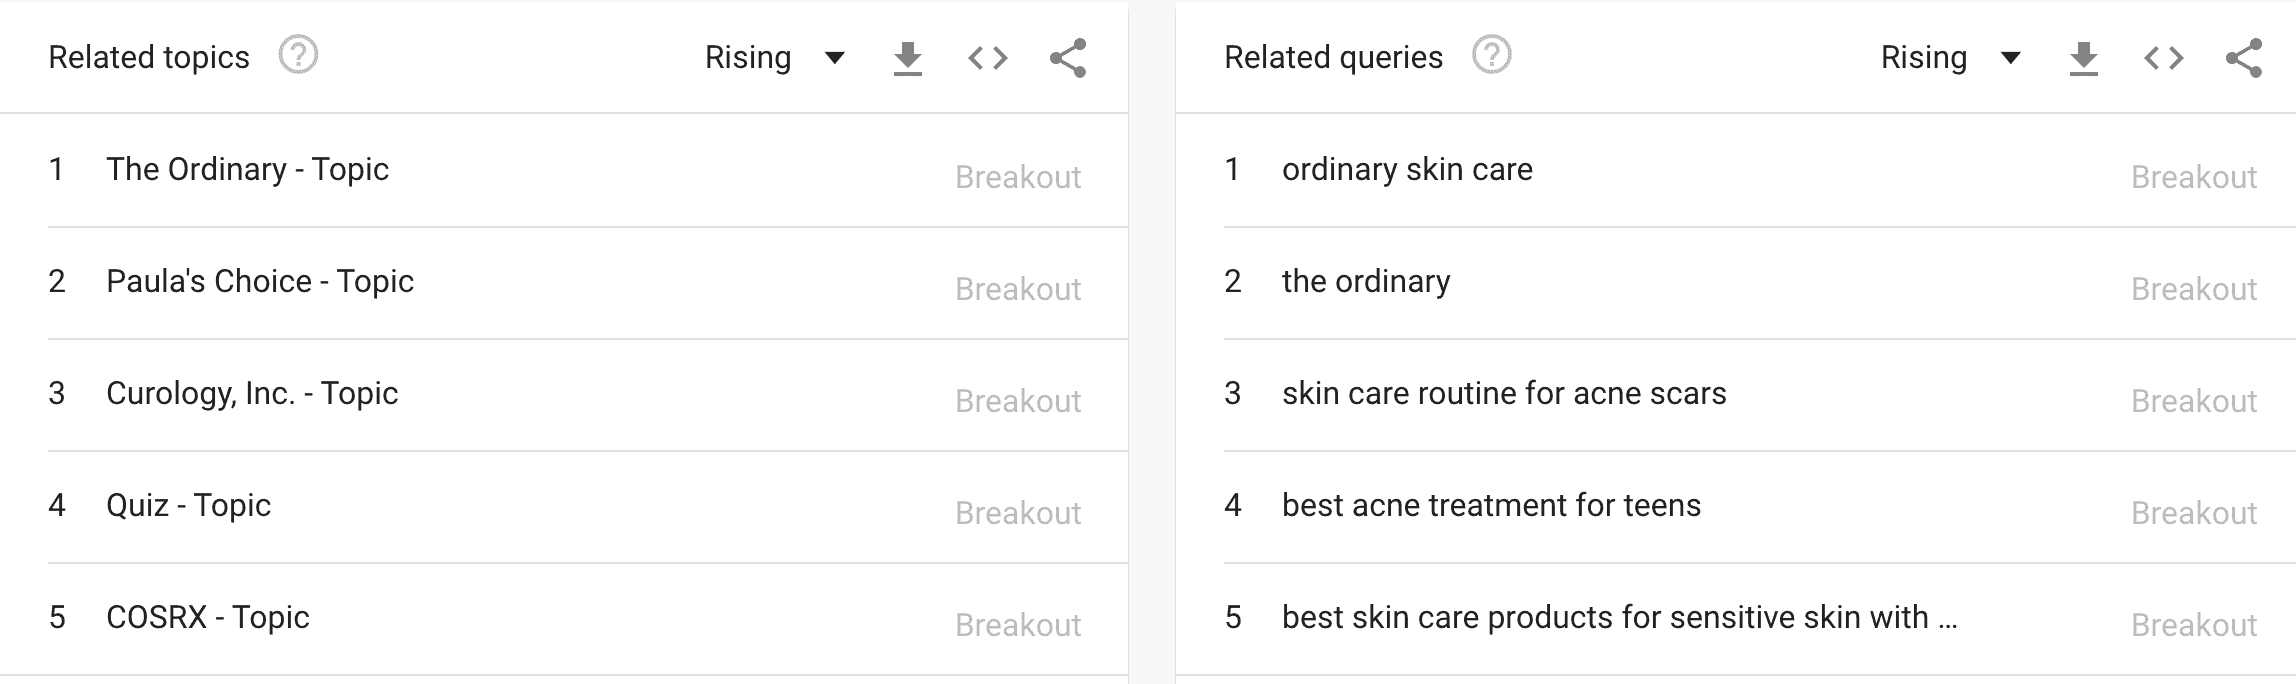 related topics in Google trends